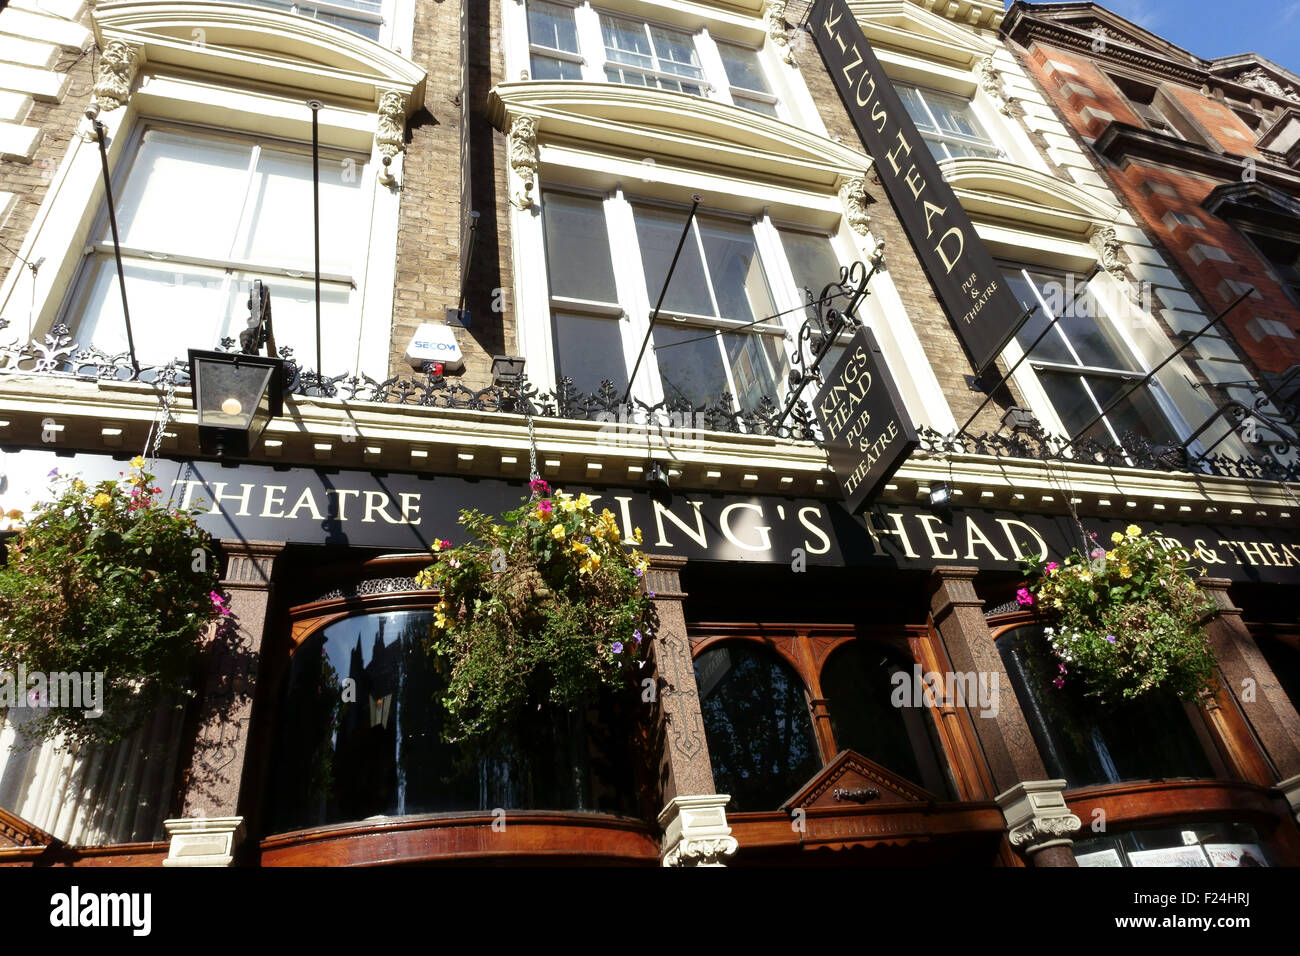 Kings head theatre pub hi-res stock photography and images - Alamy